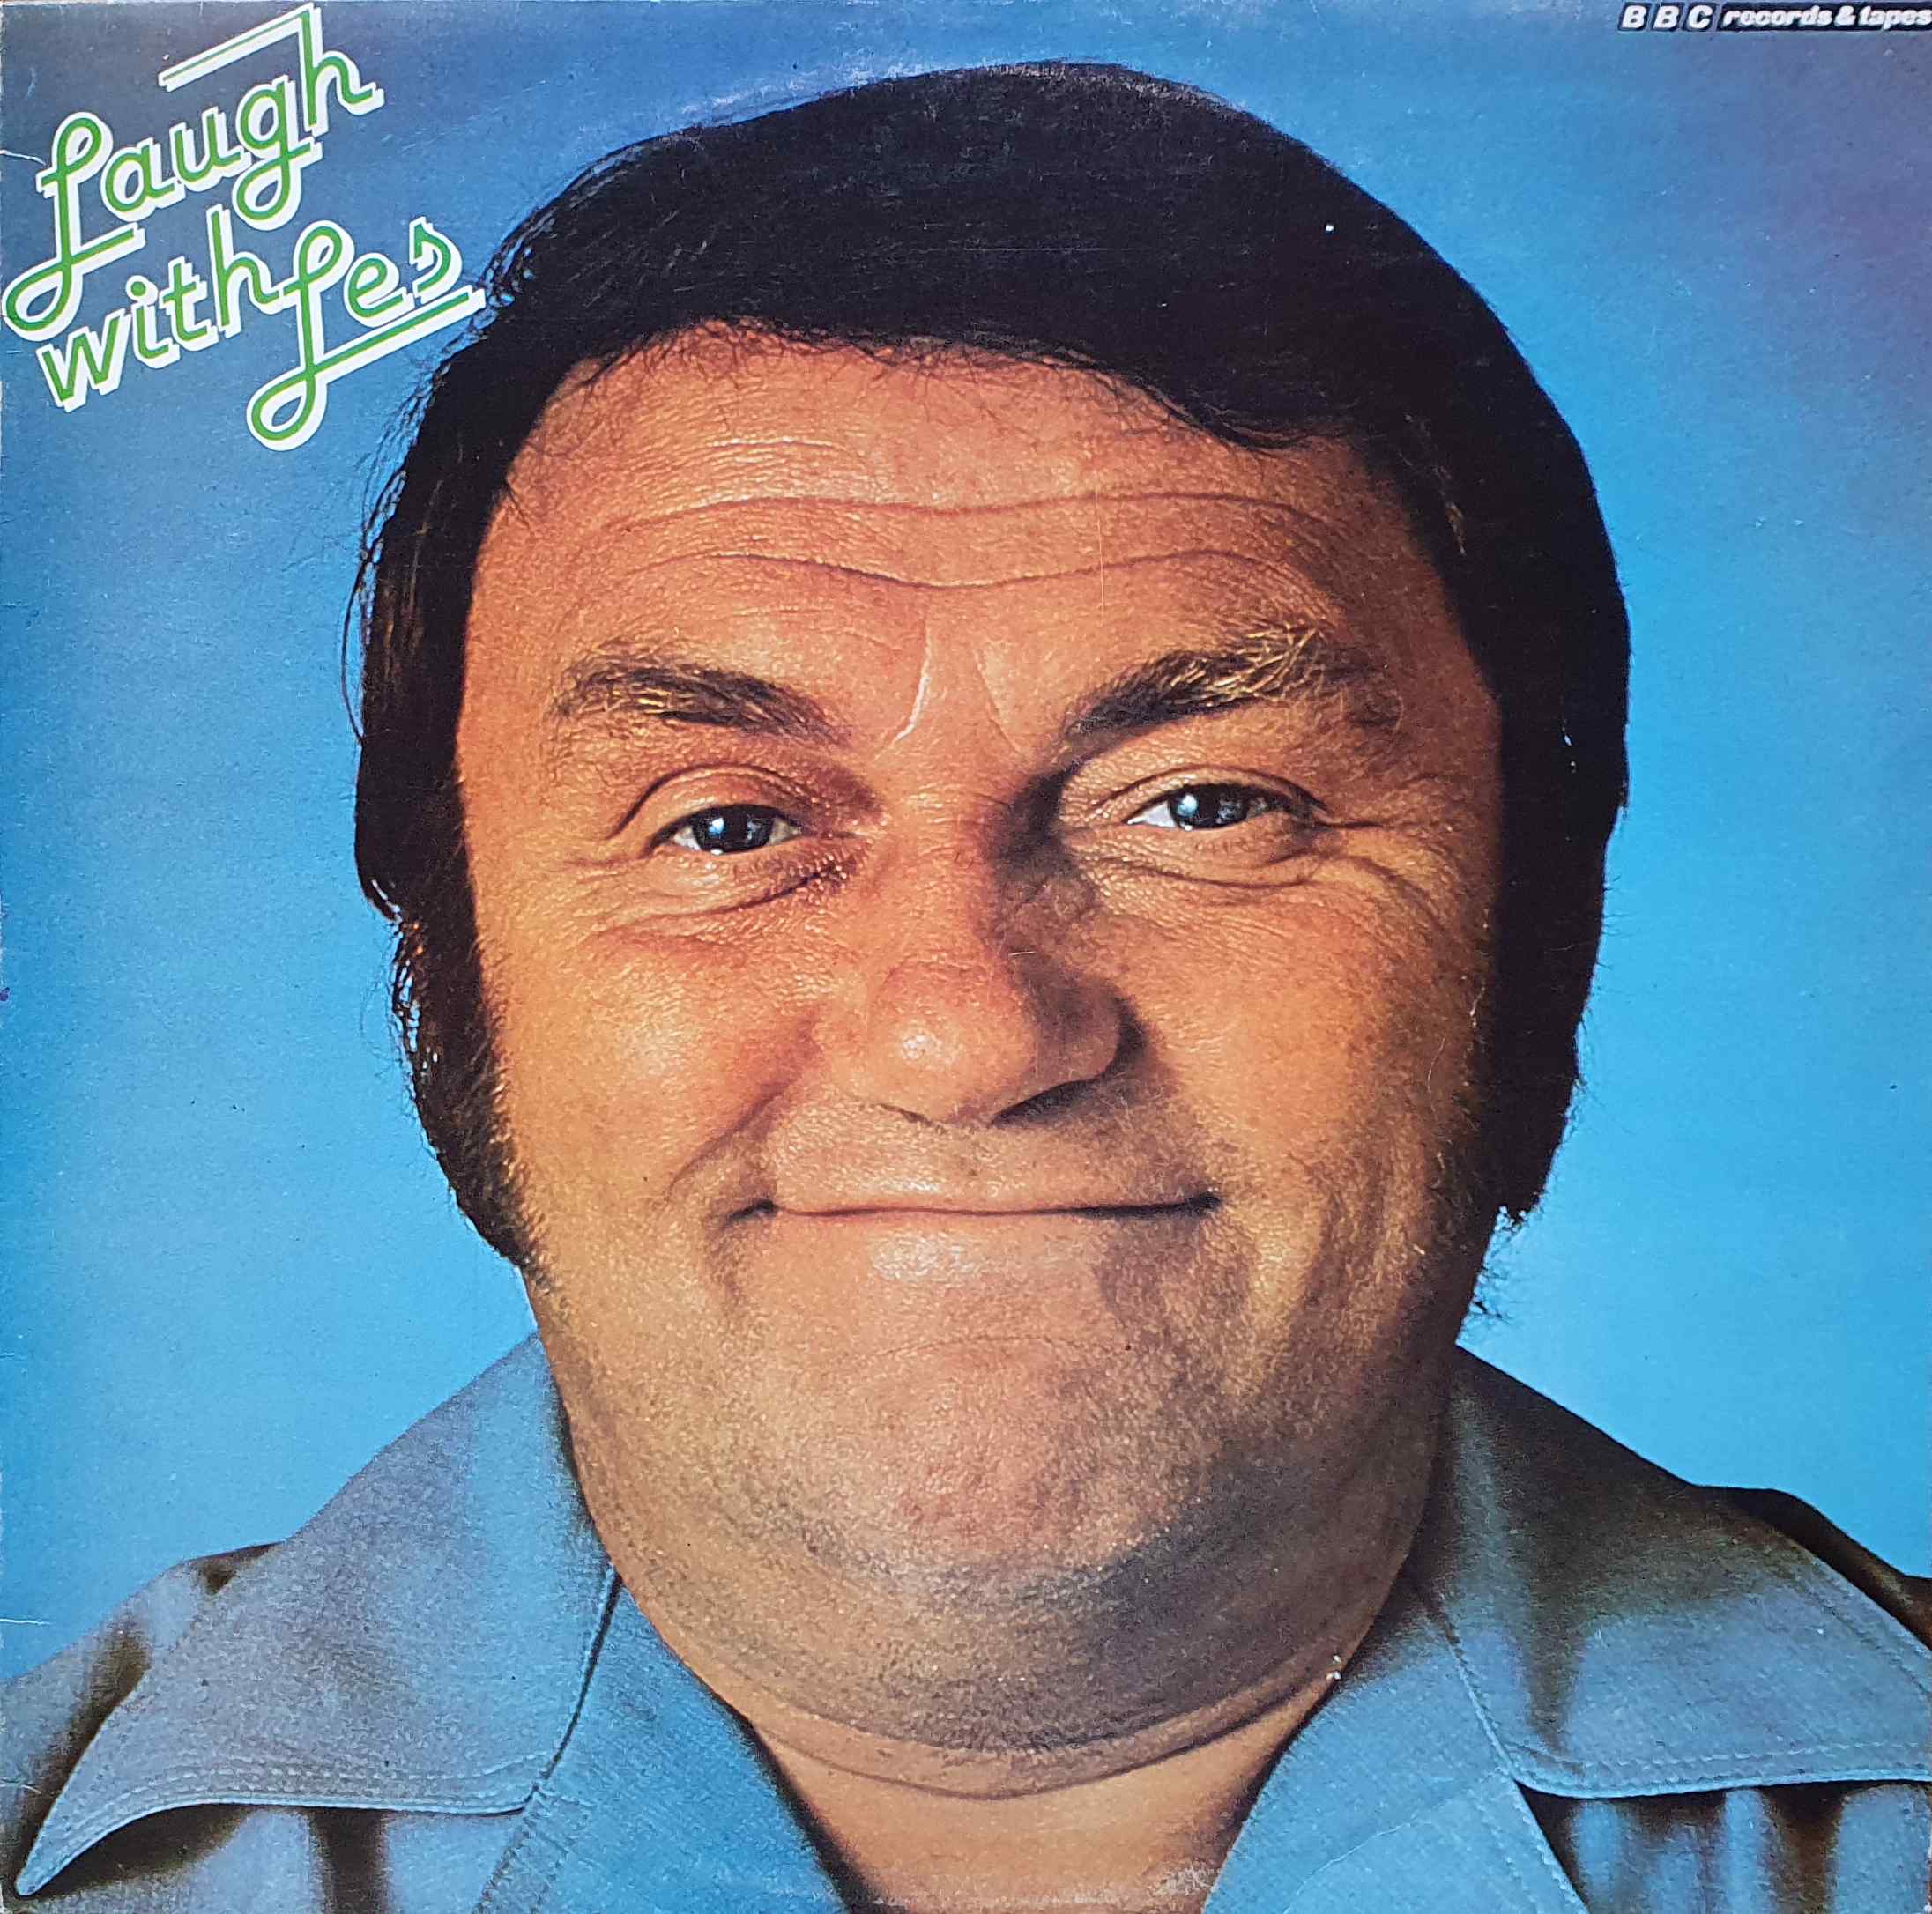 Picture of REB 346-iNZ Laugh with Les Dawson by artist Les Dawson from the BBC albums - Records and Tapes library